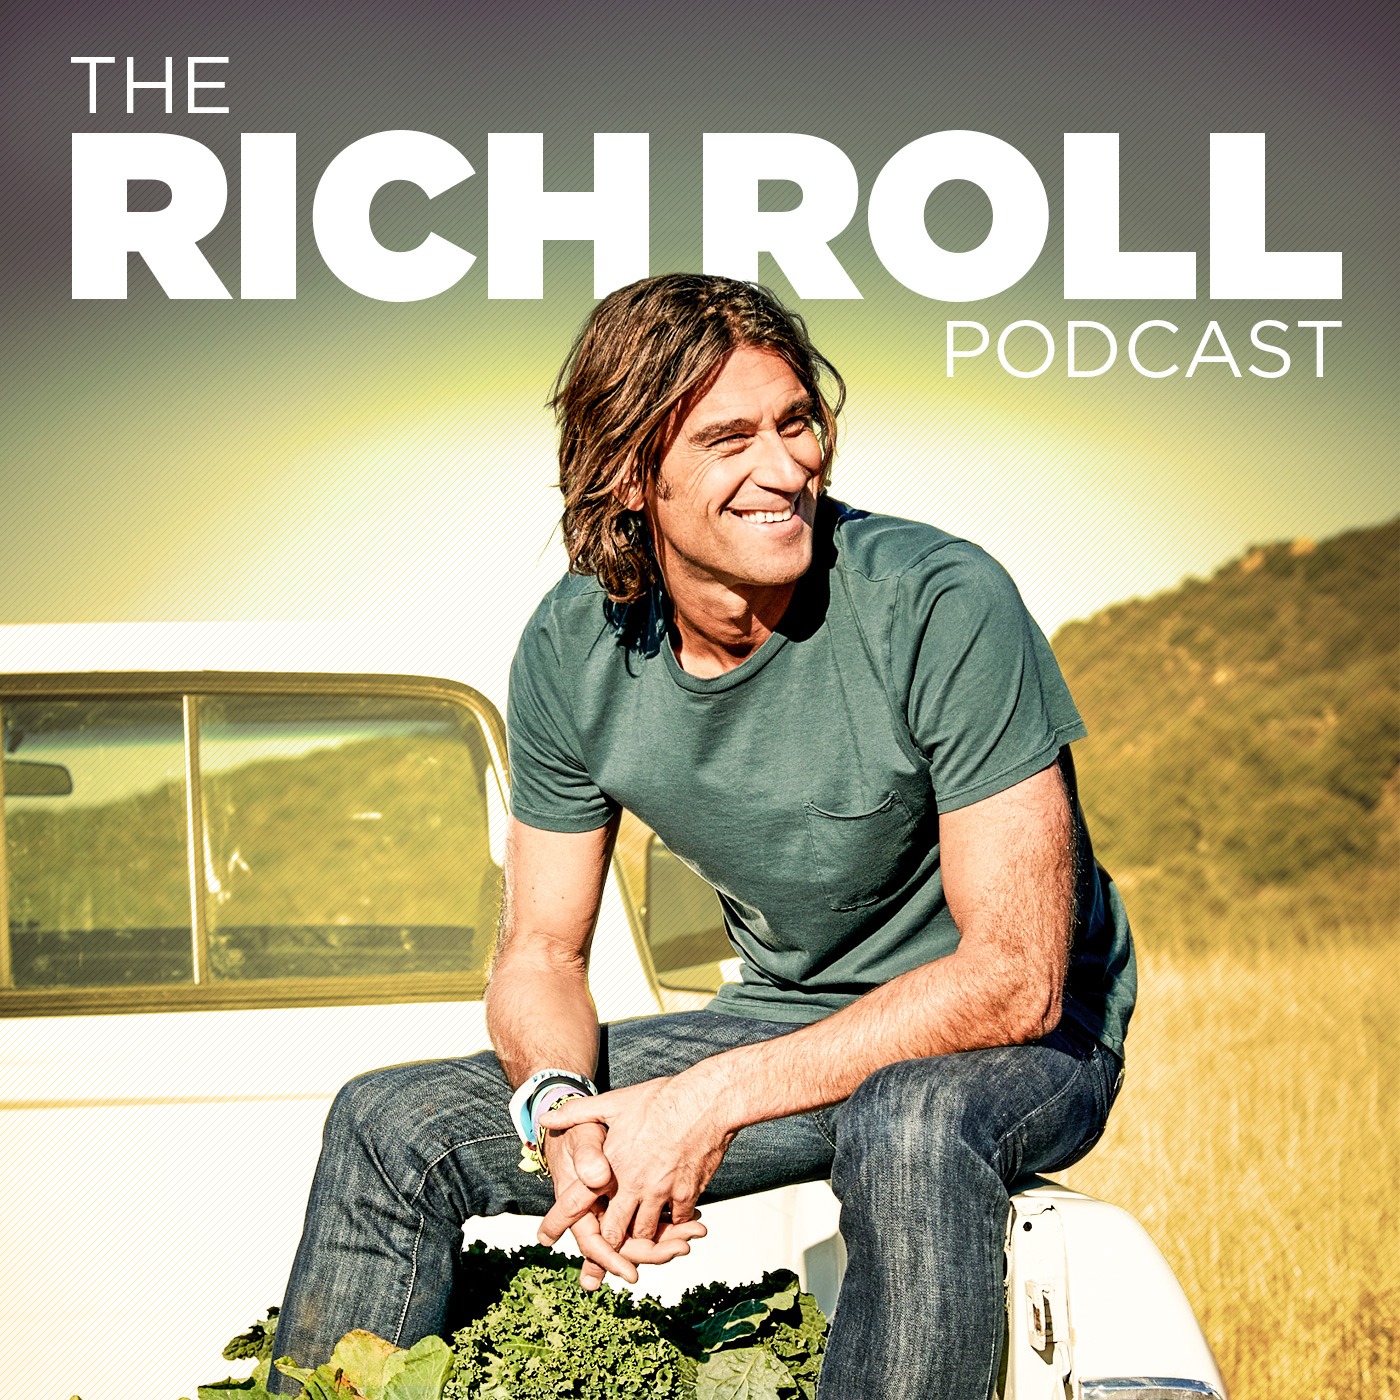 The Rich Roll Podcast Intro